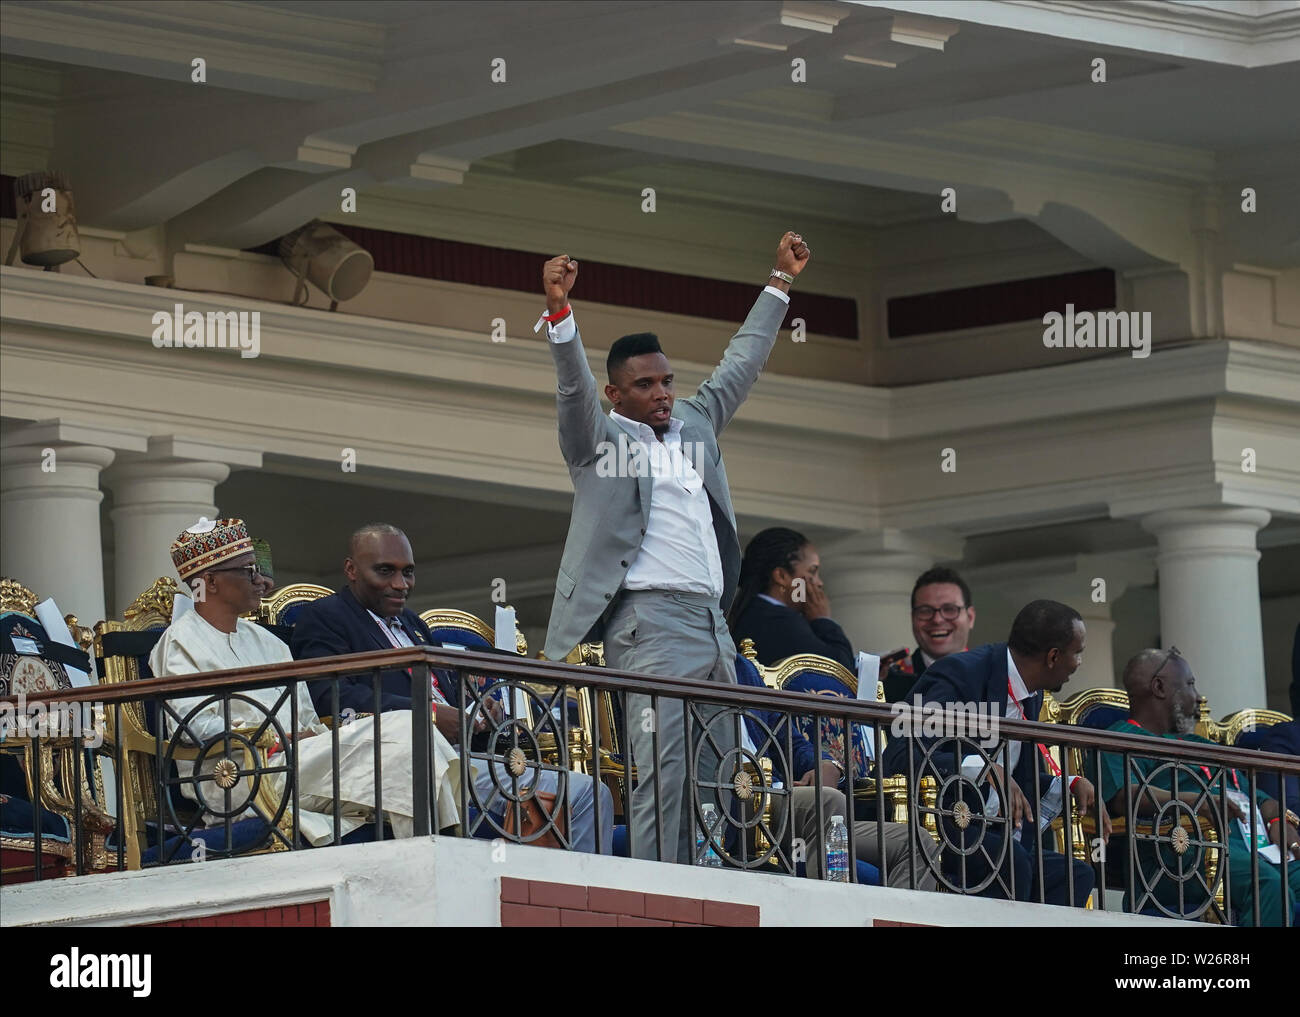 Alexandria, Egypt. 6th July 2019. FRANCE OUT July 6, 2019: Samuel Eto'o, former Cameroon player celebrating cameroon scoring to 2-1 during the 2019 African Cup of Nations match between Cameroon and Nigeria at the Alexanddria Stadium in Alexandria, Egypt. Ulrik Pedersen/CSM. Stock Photo